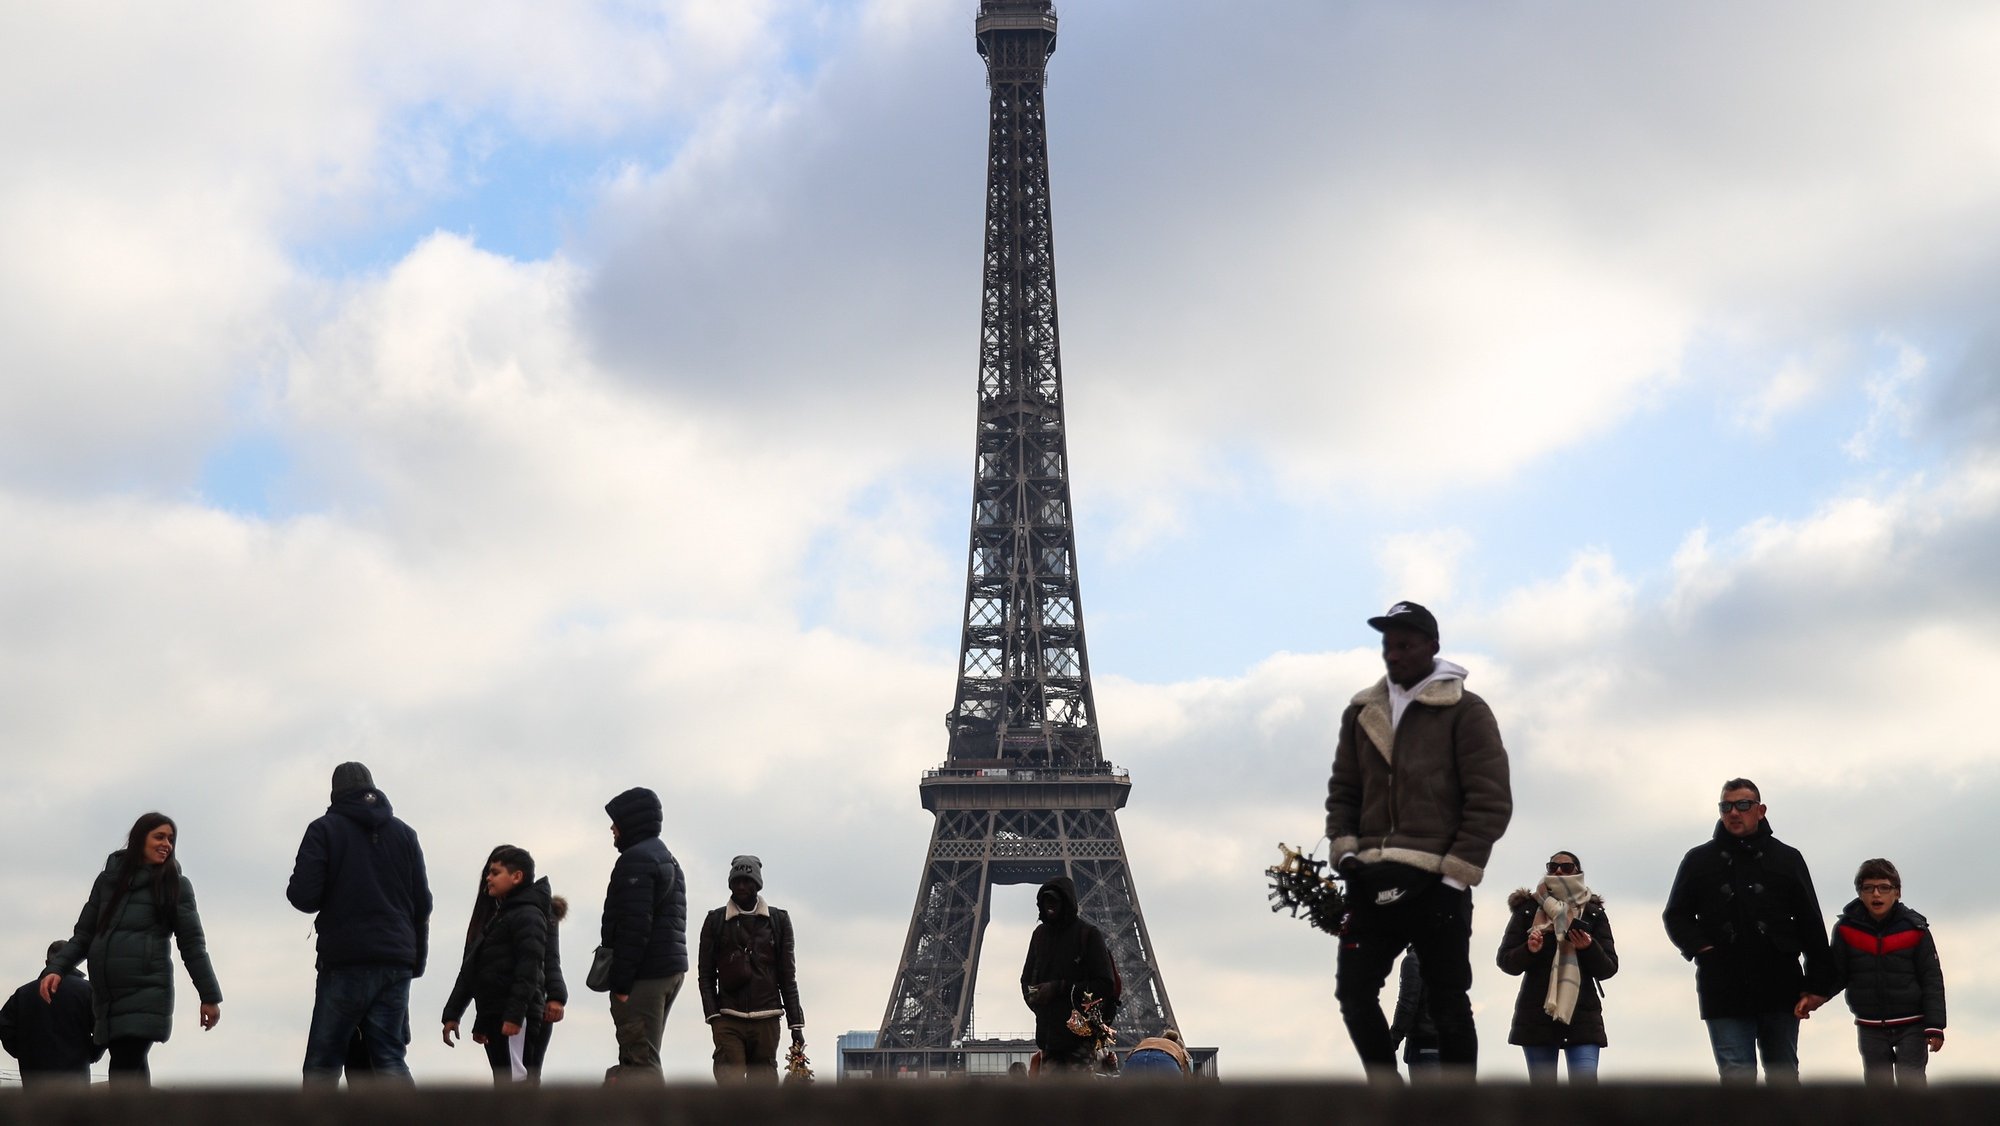 epa09600571 People walk in Place Trocadero near the Eiffel Tower in Paris, France, 24 November 2021. France gears up for the fifth wave of the coronavirus Sars-CoV-2 pandemic.  EPA/Mohammed Badra